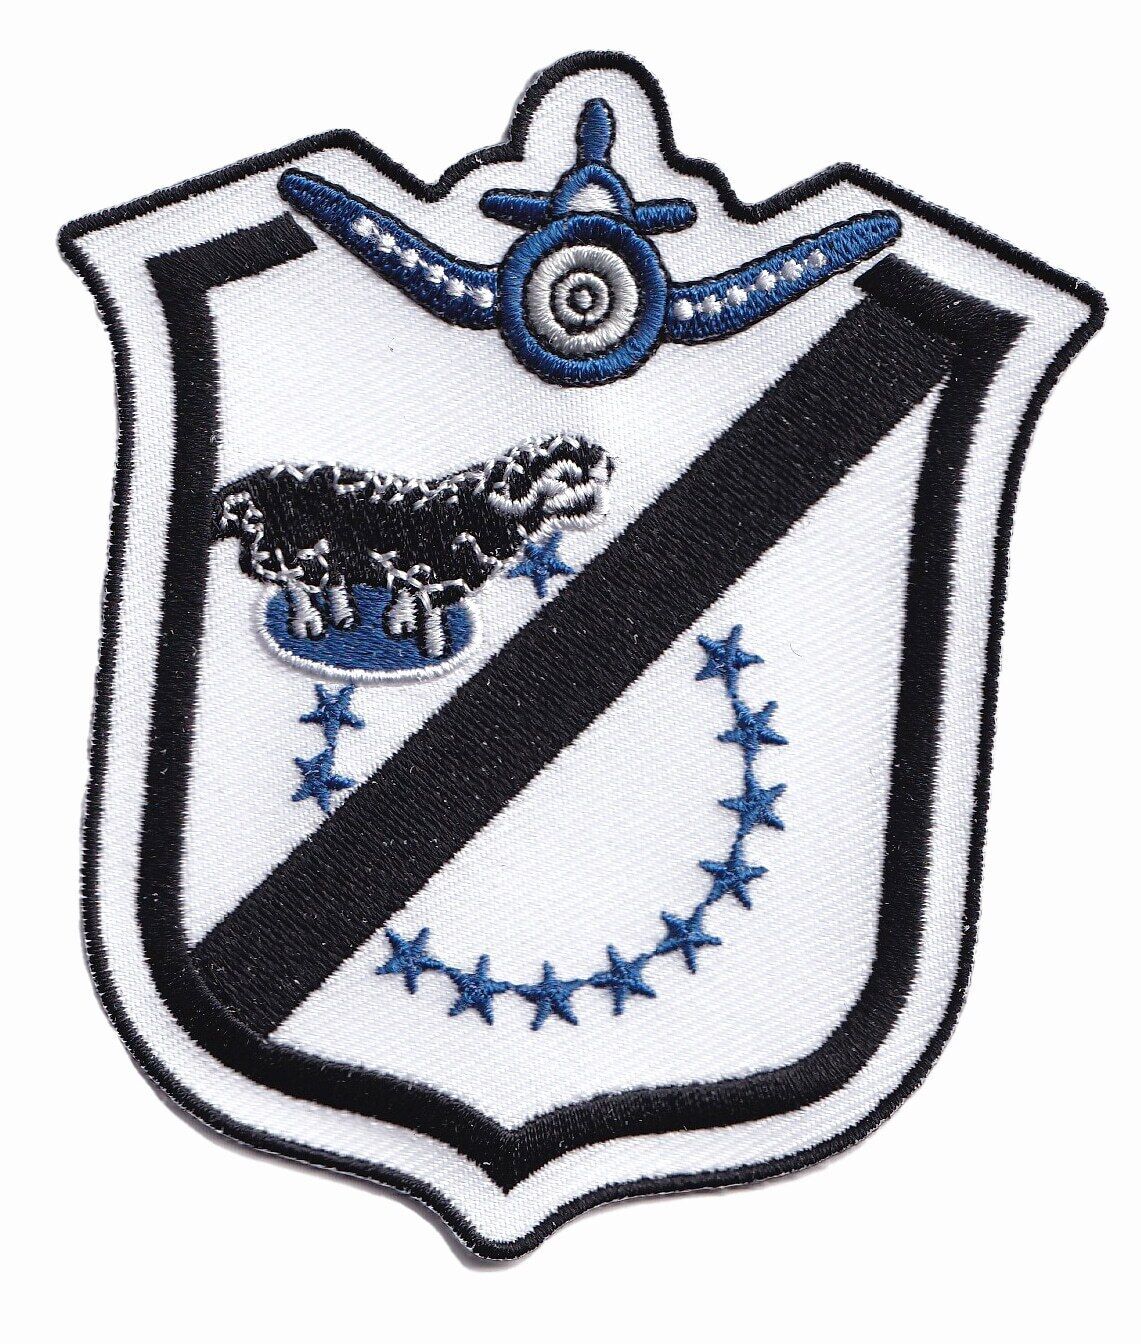 VMF-214 Blacksheep Squadron Patch -With Hook and Loop